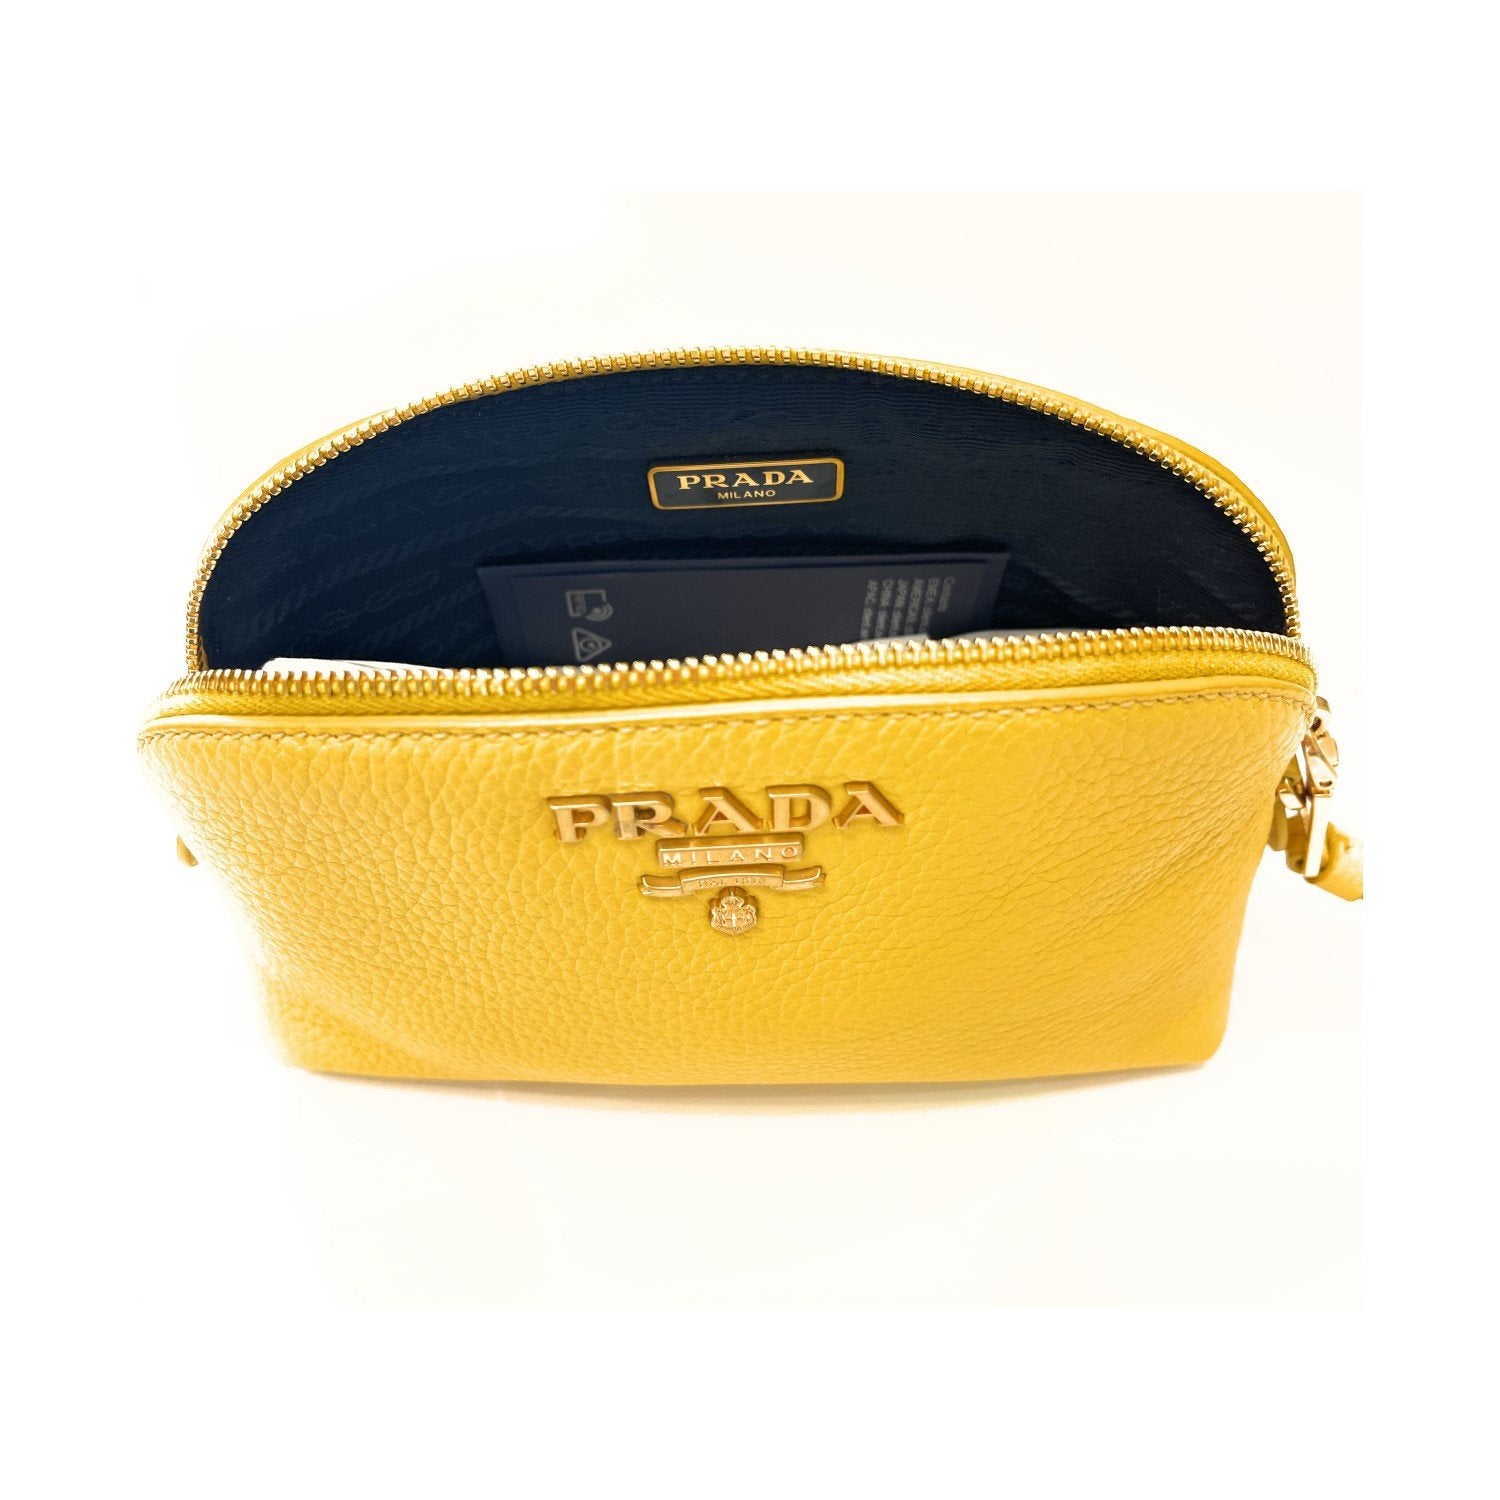 Prada Contenitore Yellow Vitello Daino Pouch Vanity Cosmetic Case 1ND005 at_Queen_Bee_of_Beverly_Hills